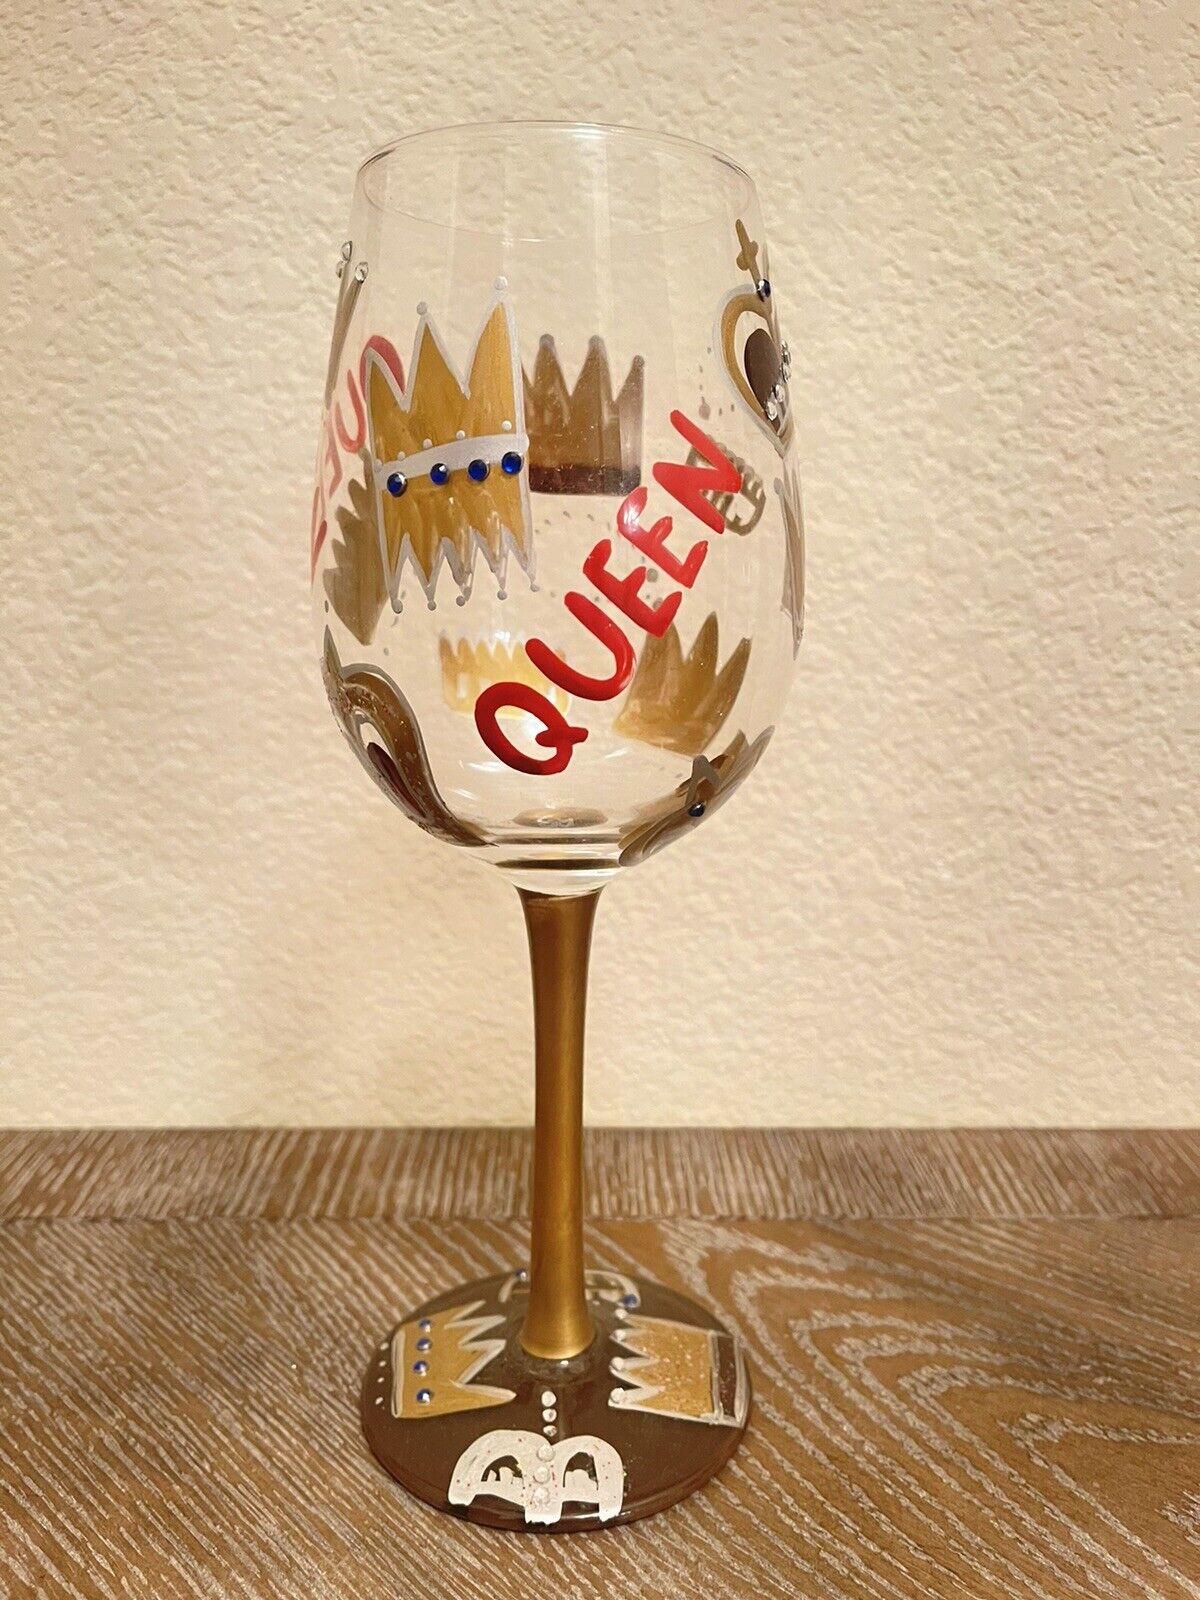 Lolita Queen Theme Hand Painted Wine Glass with Recipe on Bottom alcohol Girl